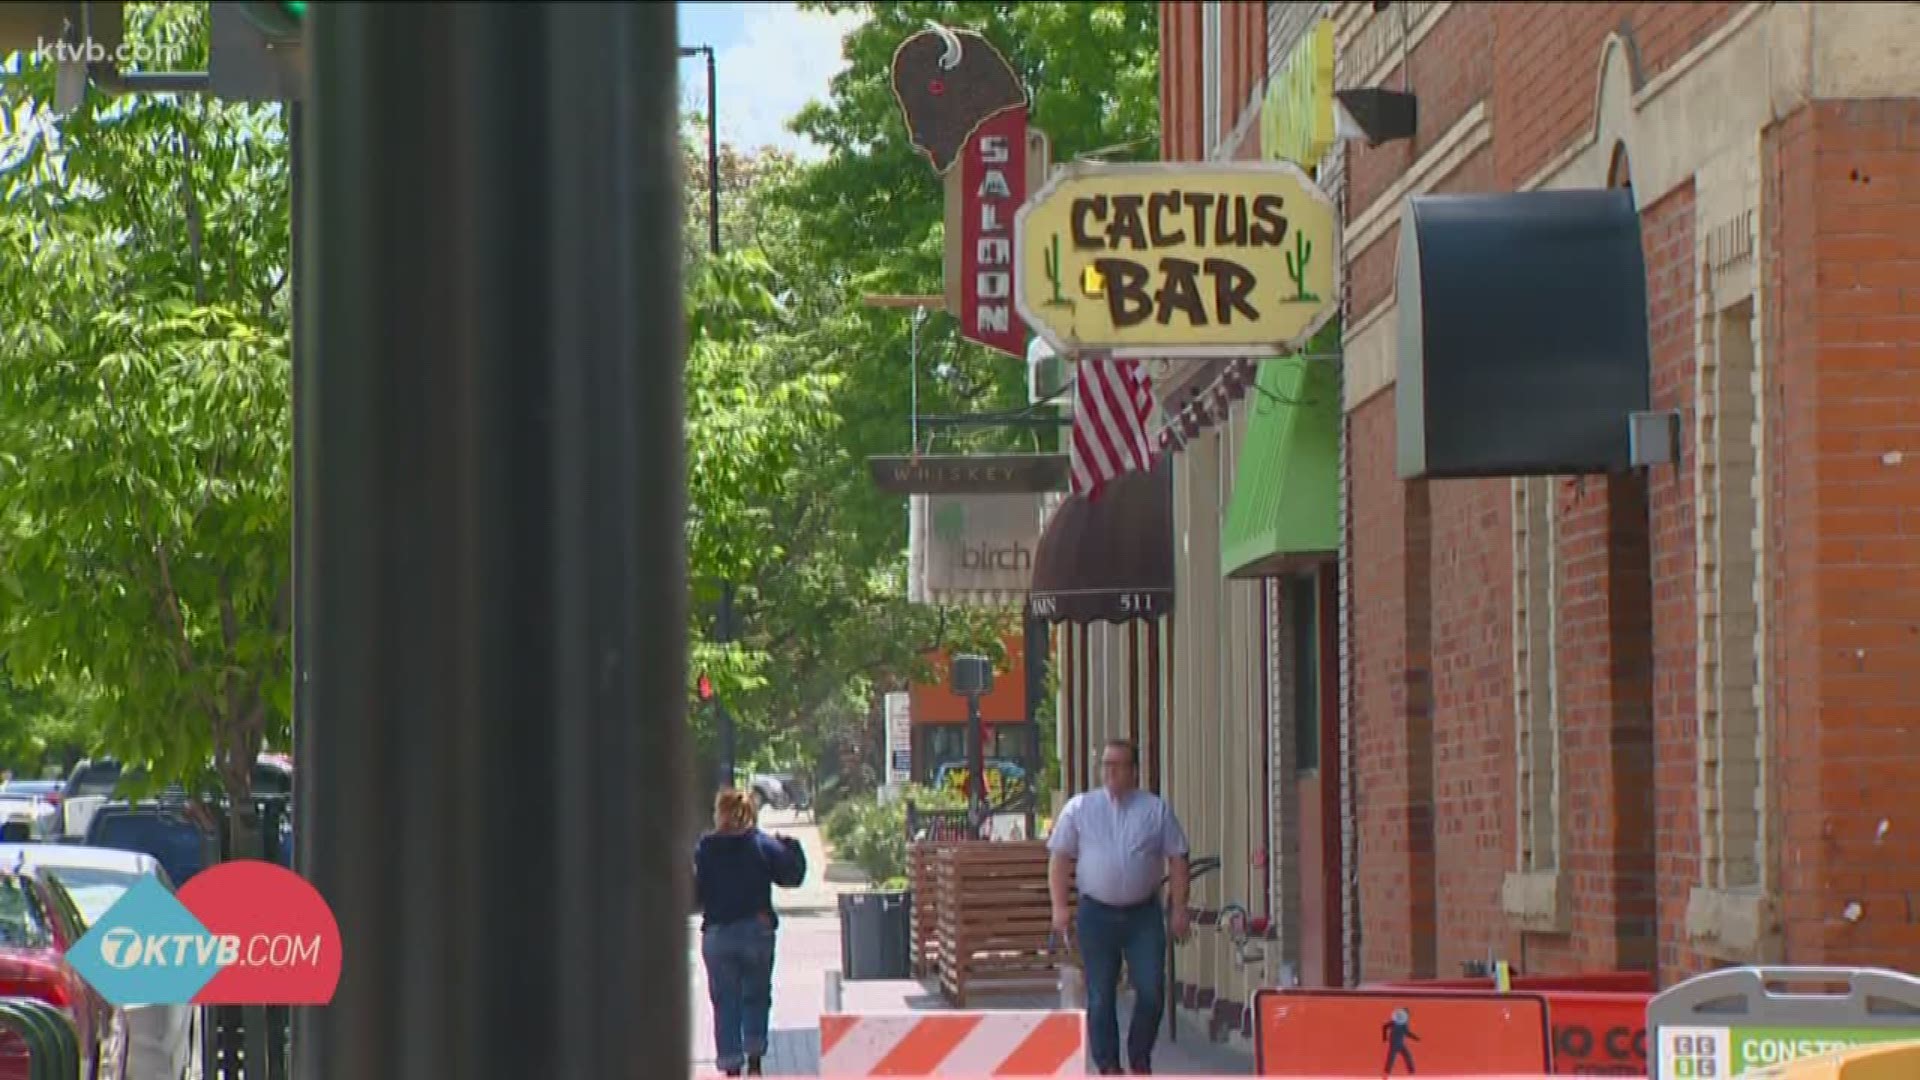 The warning from Central District Health listed six bars in downtown Boise where 10 people visited last weekend.